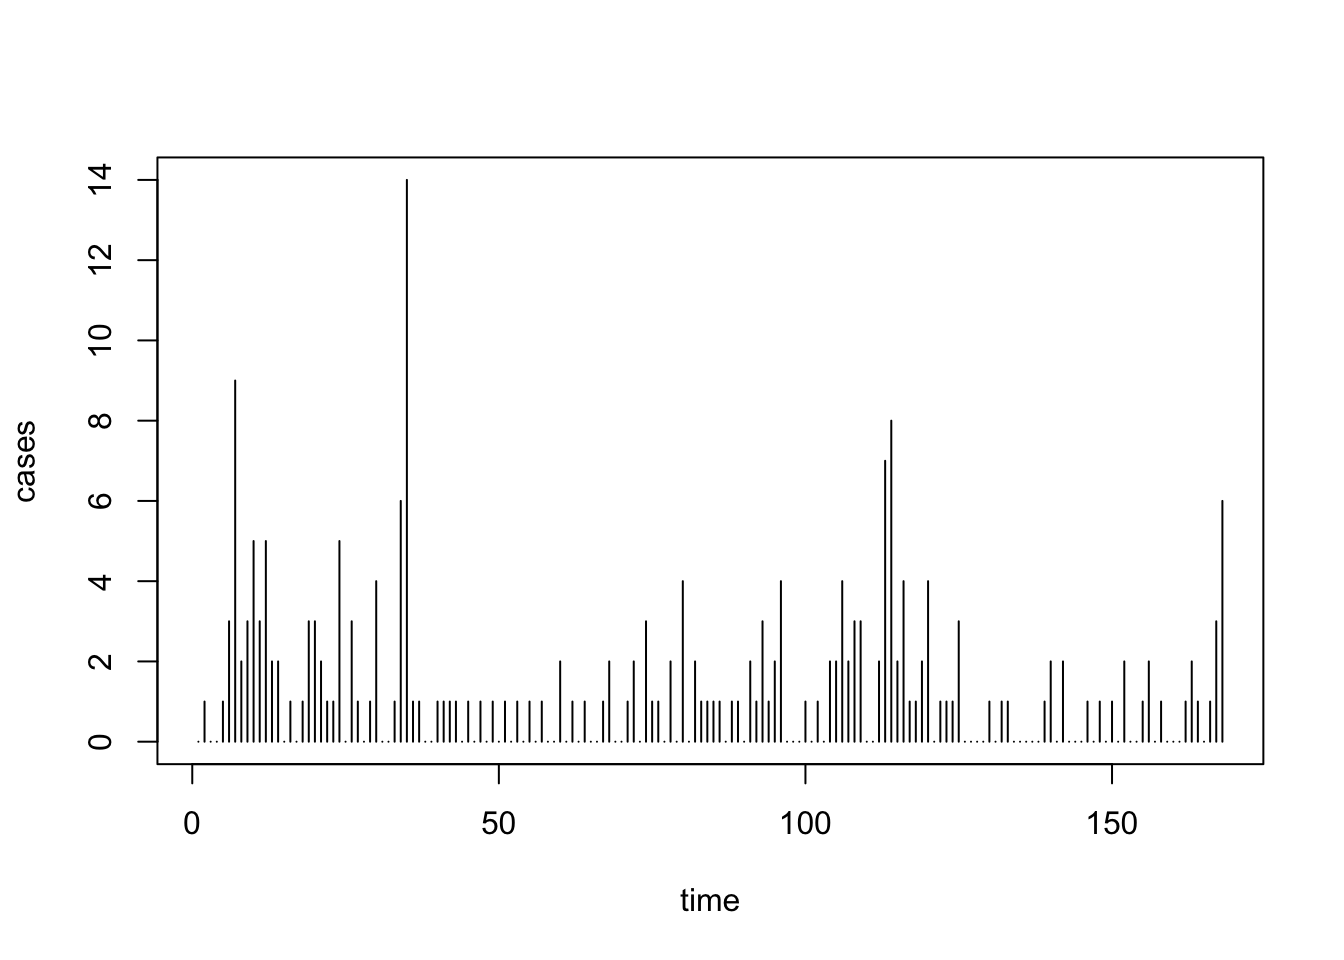 Plot of monthly reported number of Polio cases in the US between 1970 and 1983.